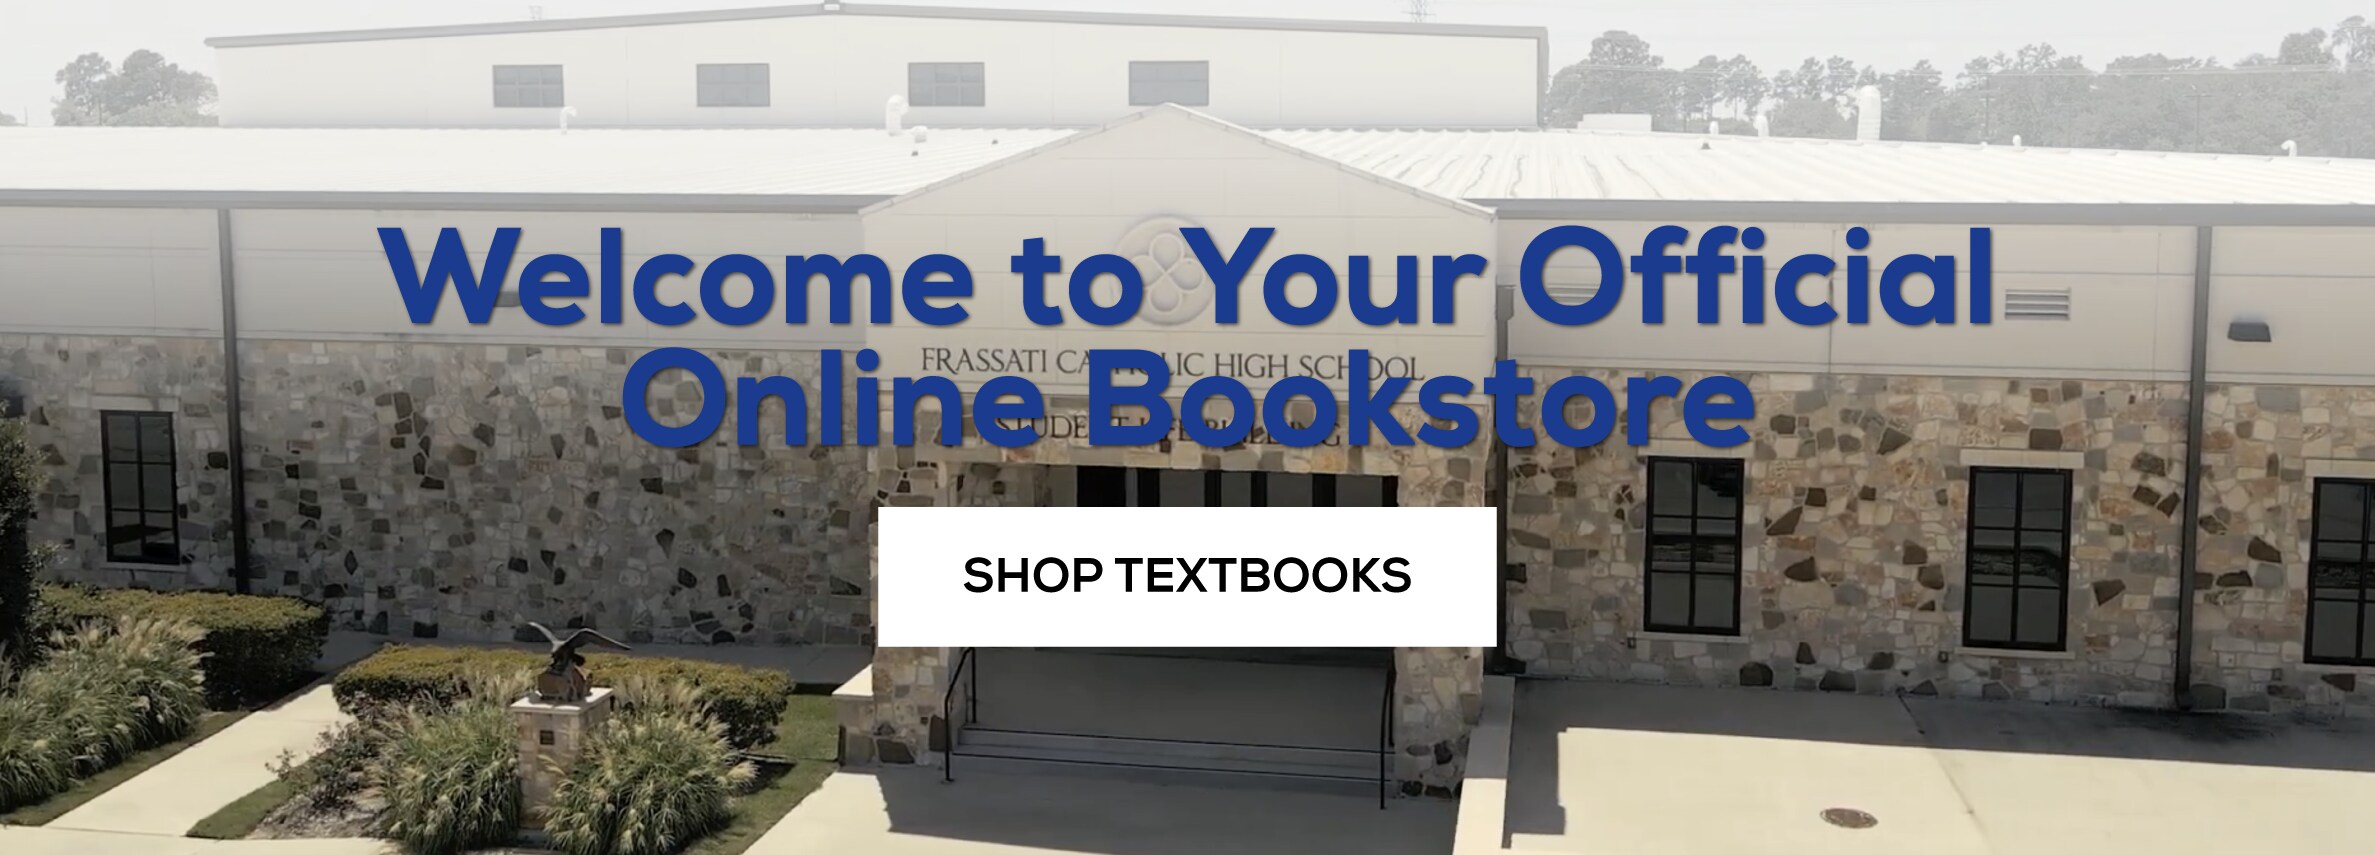 Welcome to your official online bookstore. Shop Textbooks